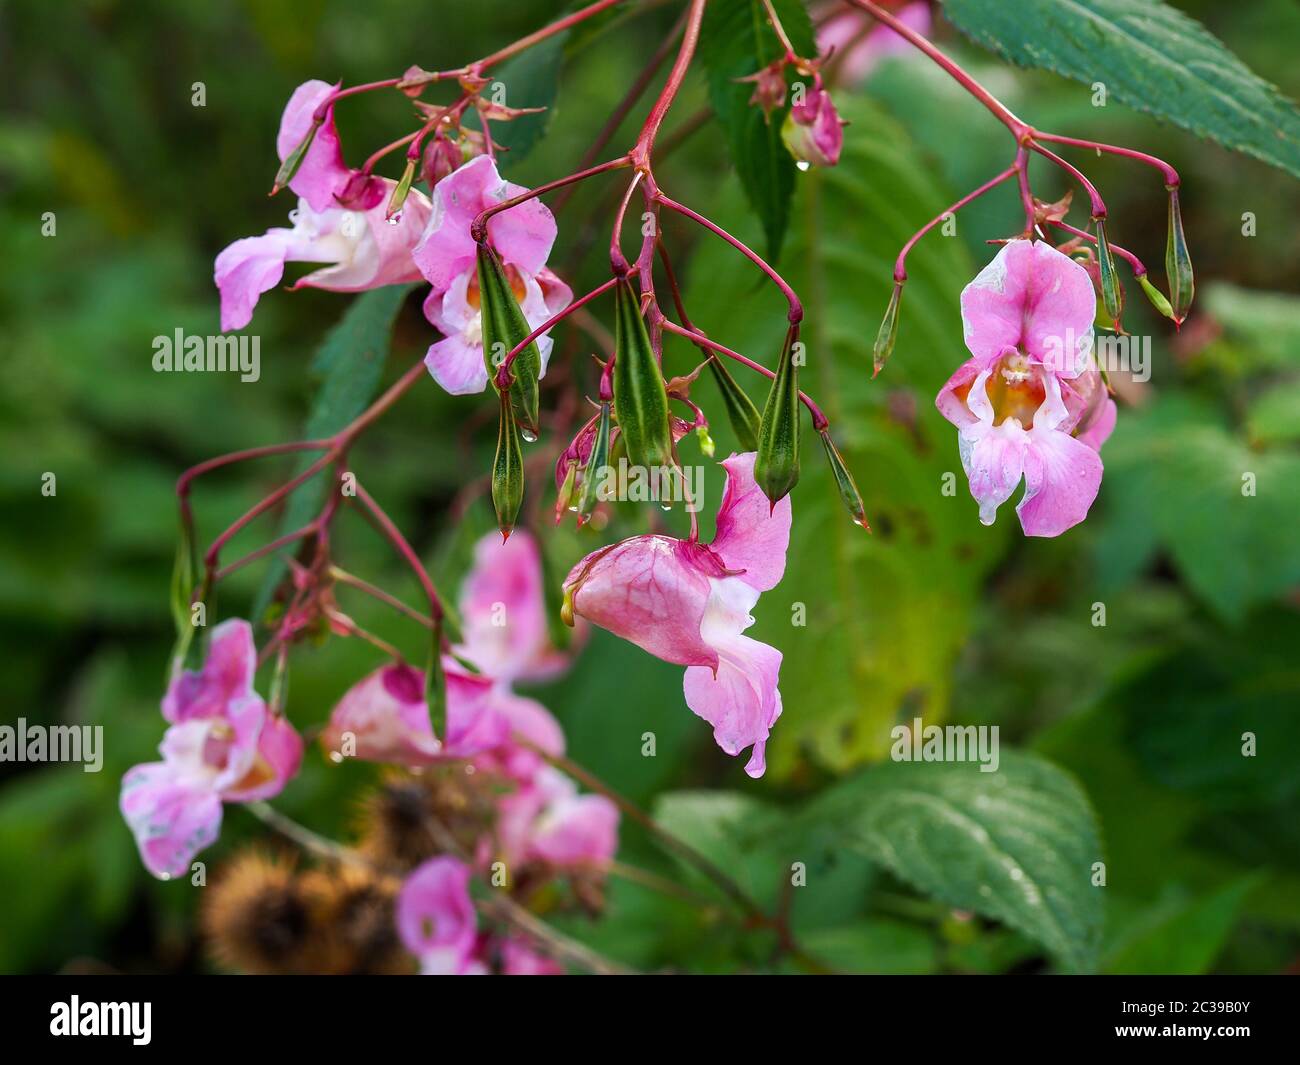 Pink flowers and green leaves of invasive Himalayan balsam, Impatiens gladulifera, in North Yorkshire, England Stock Photo